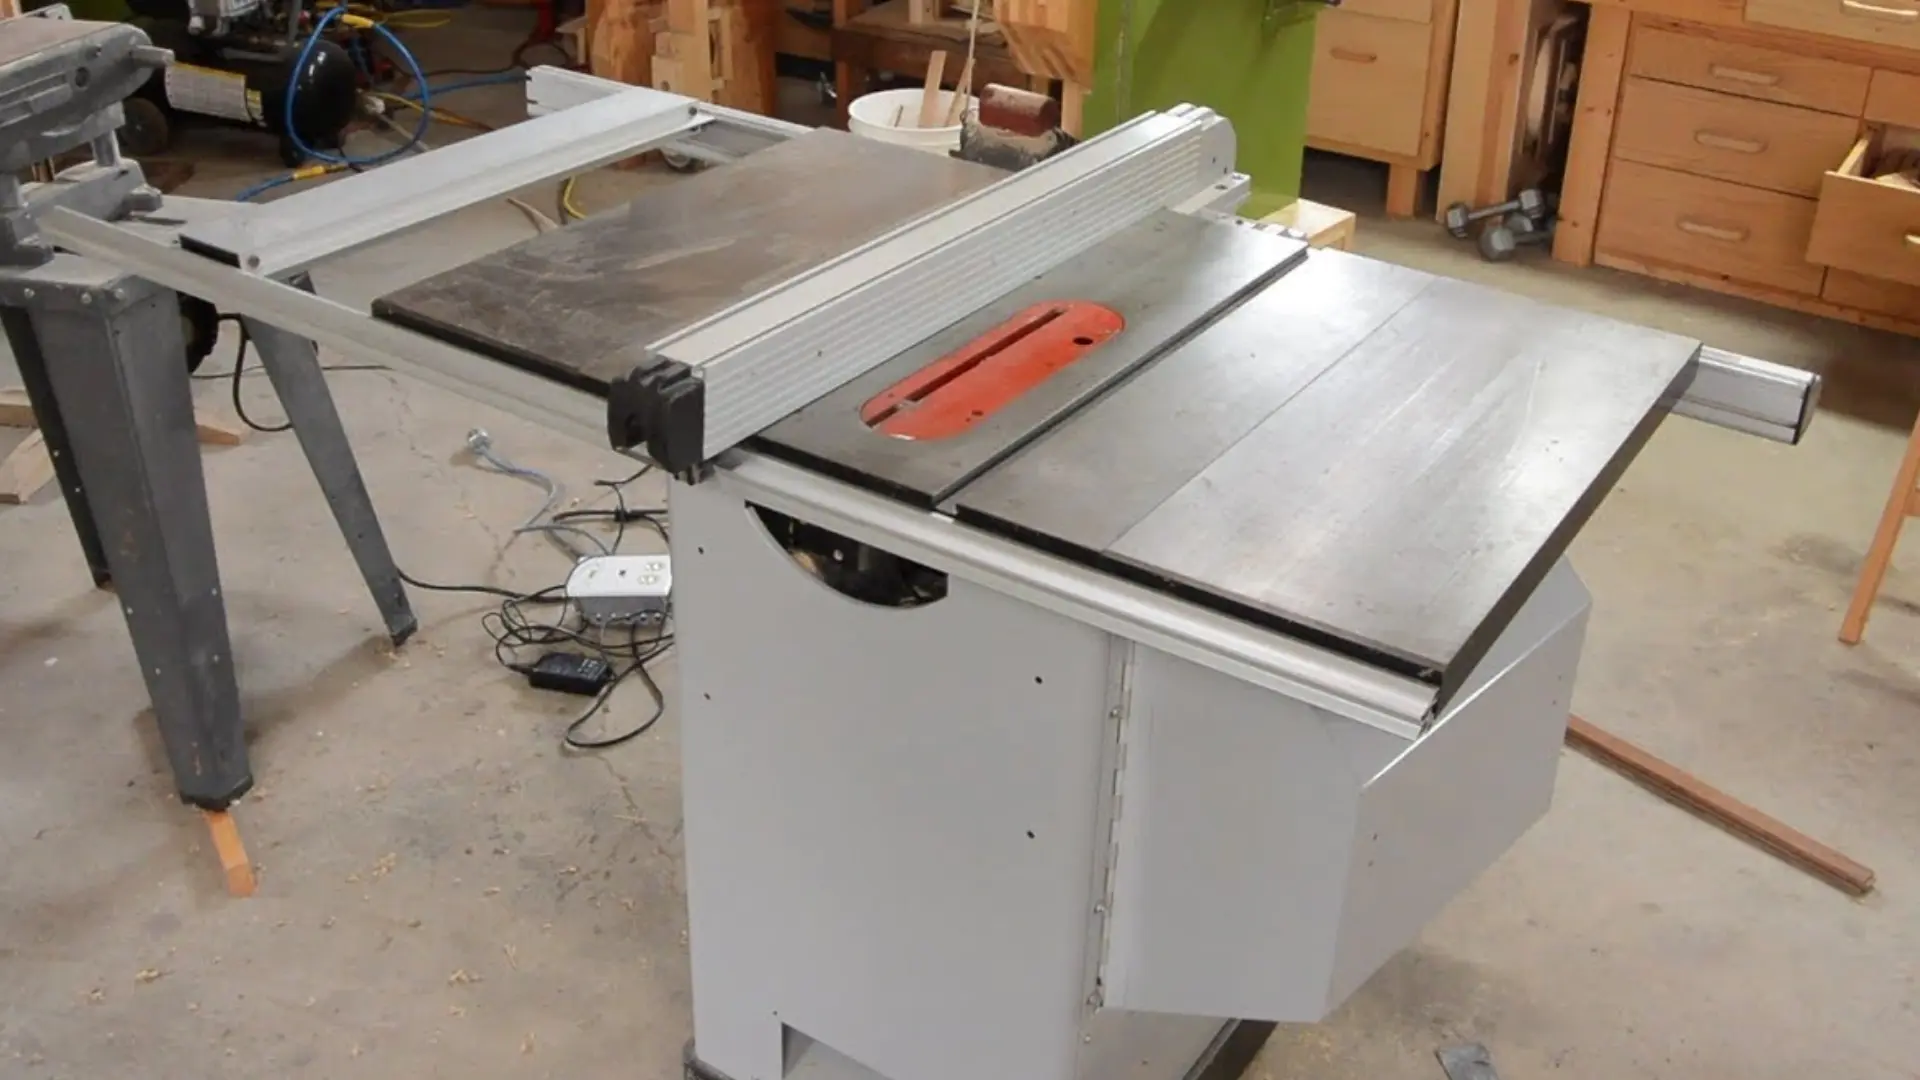 What is a hybrid table saw